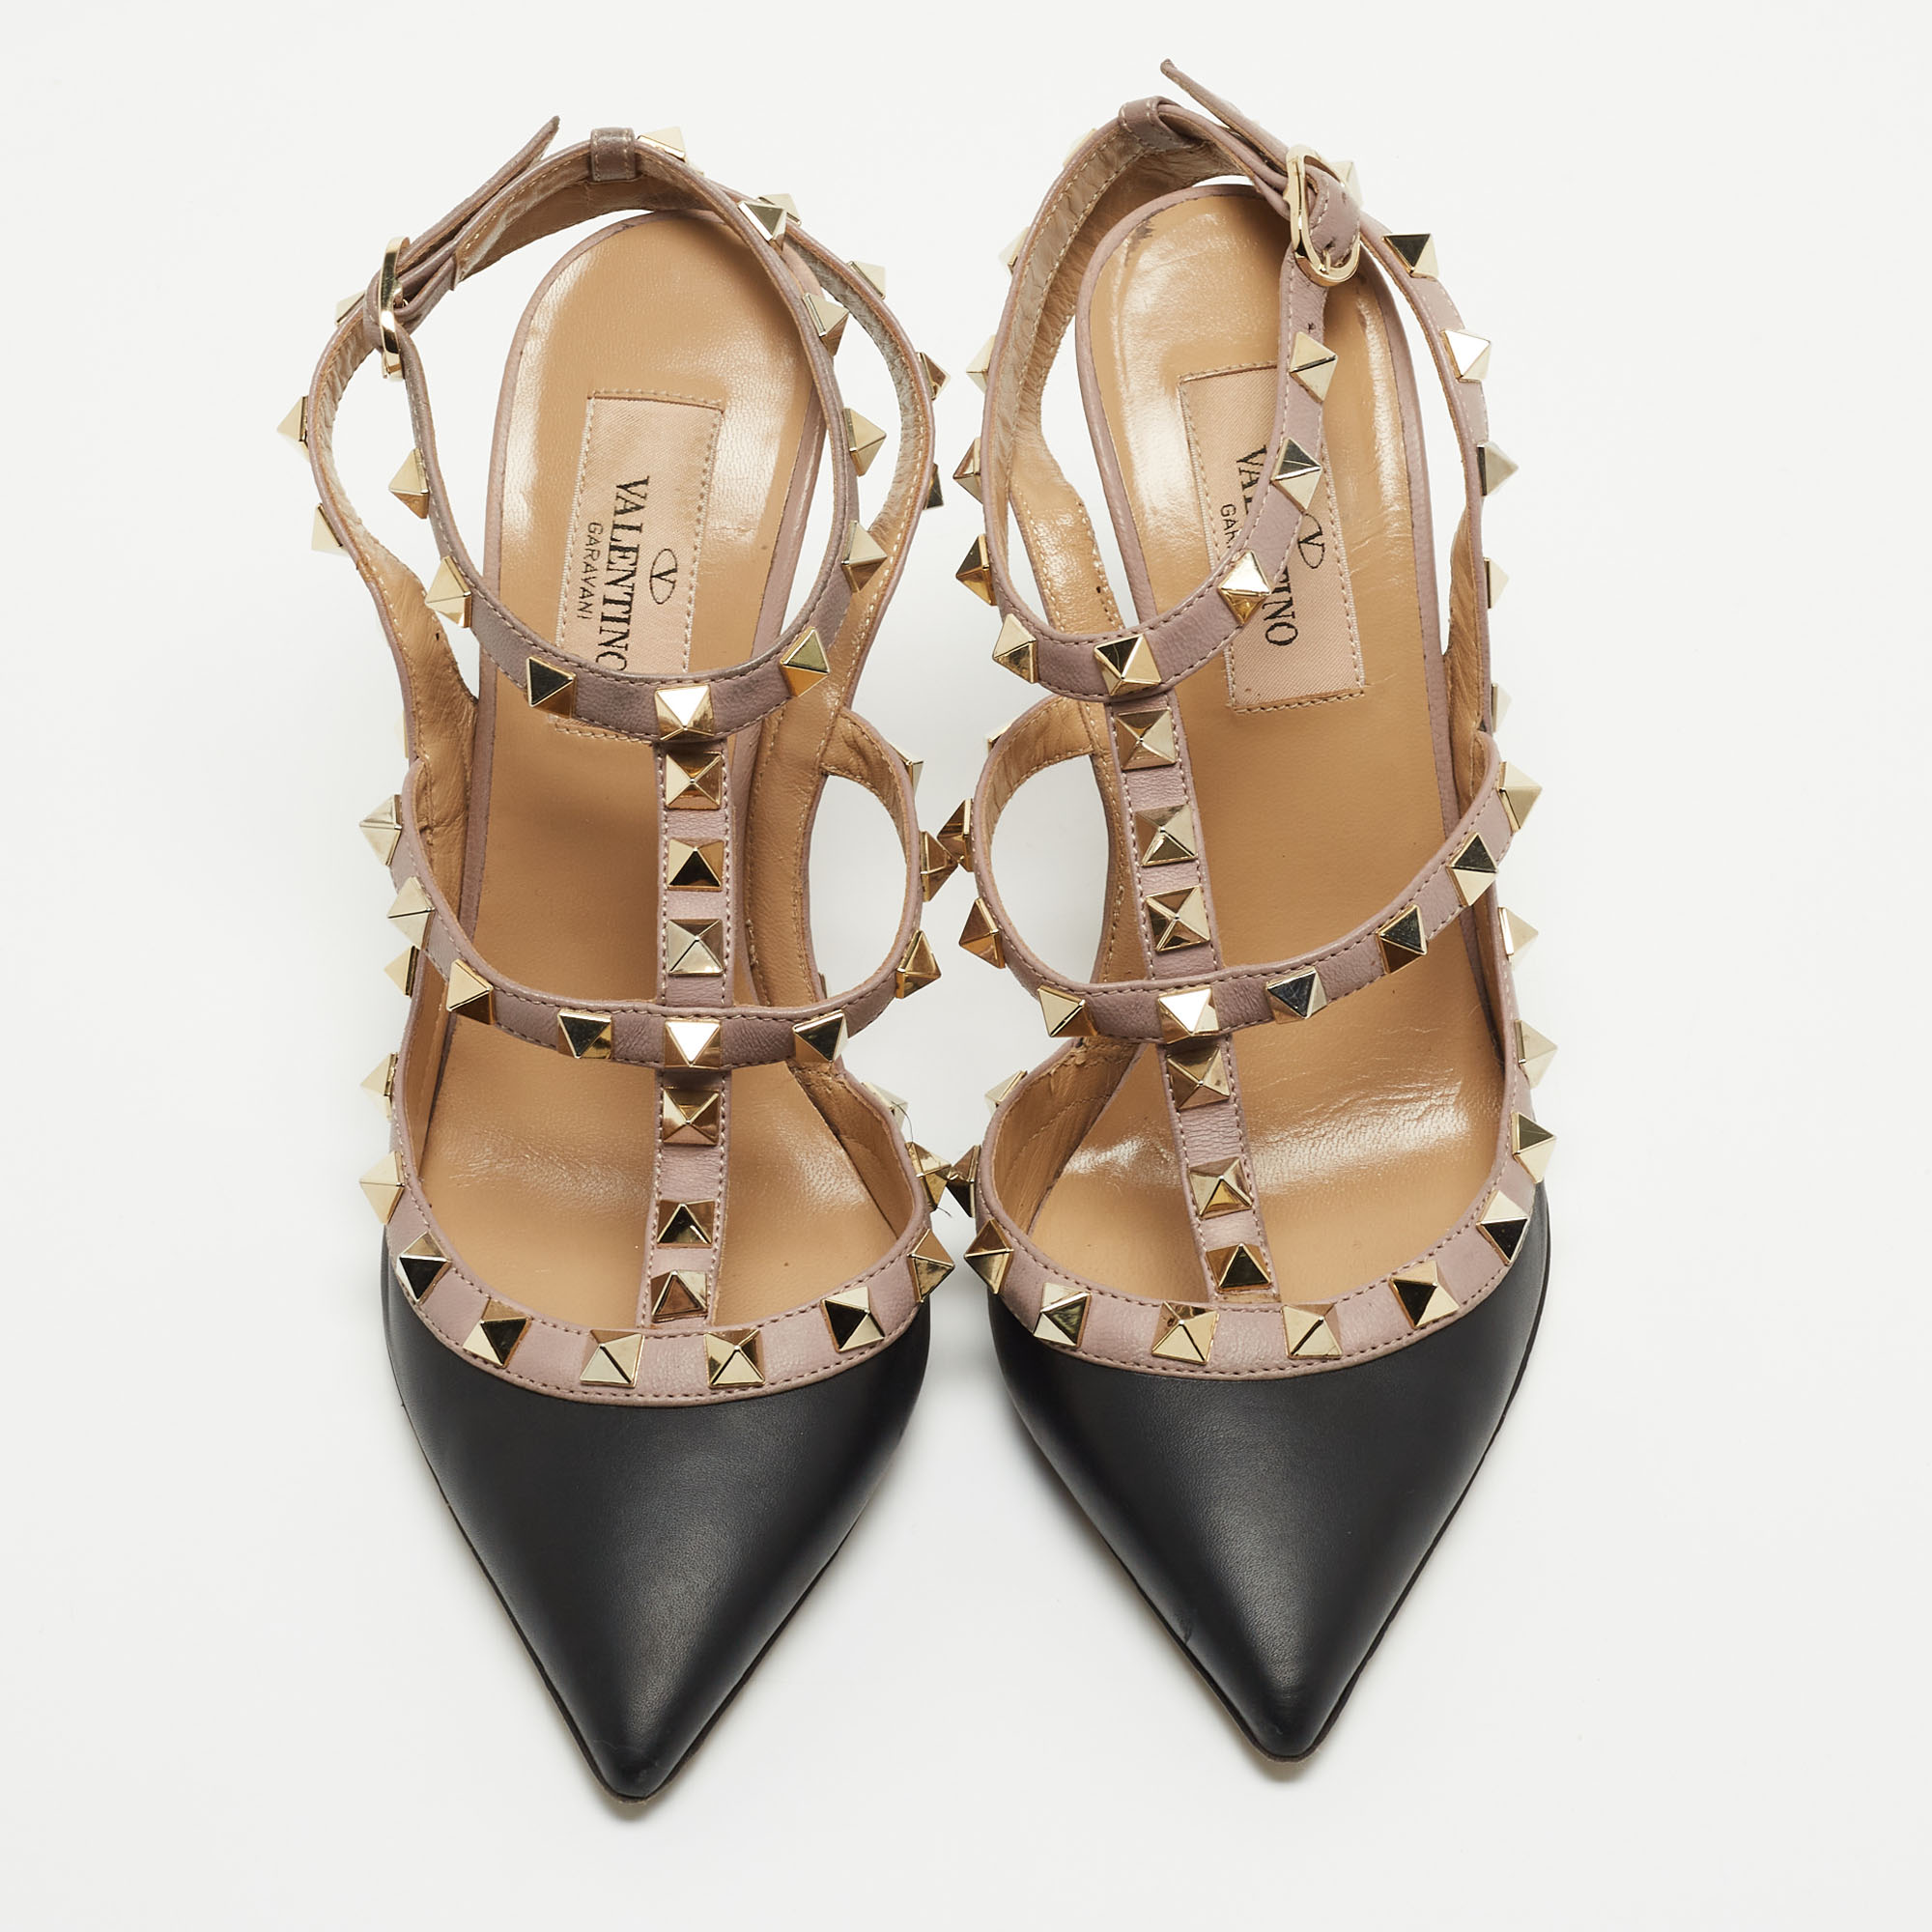 Valentino Black/Beige Leather Rockstud Strappy Pointed Toe Pumps Size 35.5